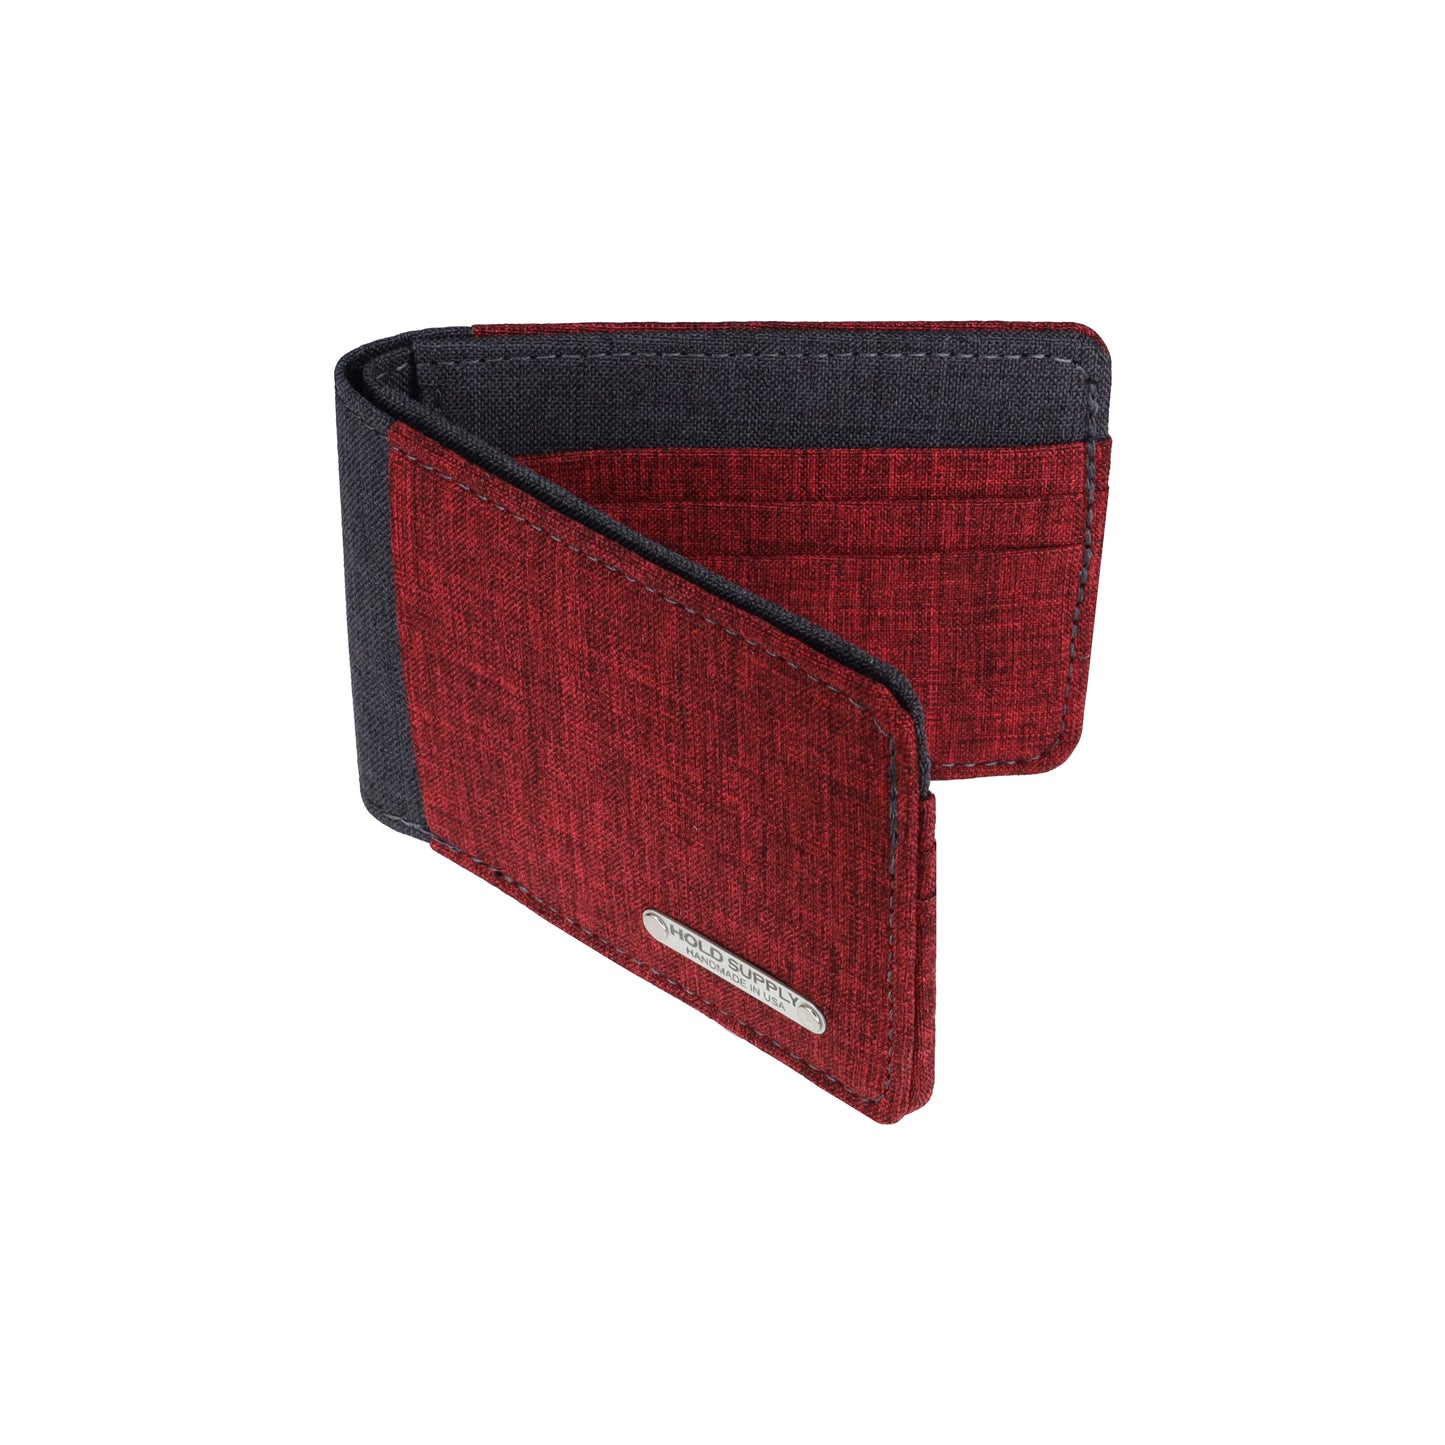 Red and Gray Fabric Bifold Wallet